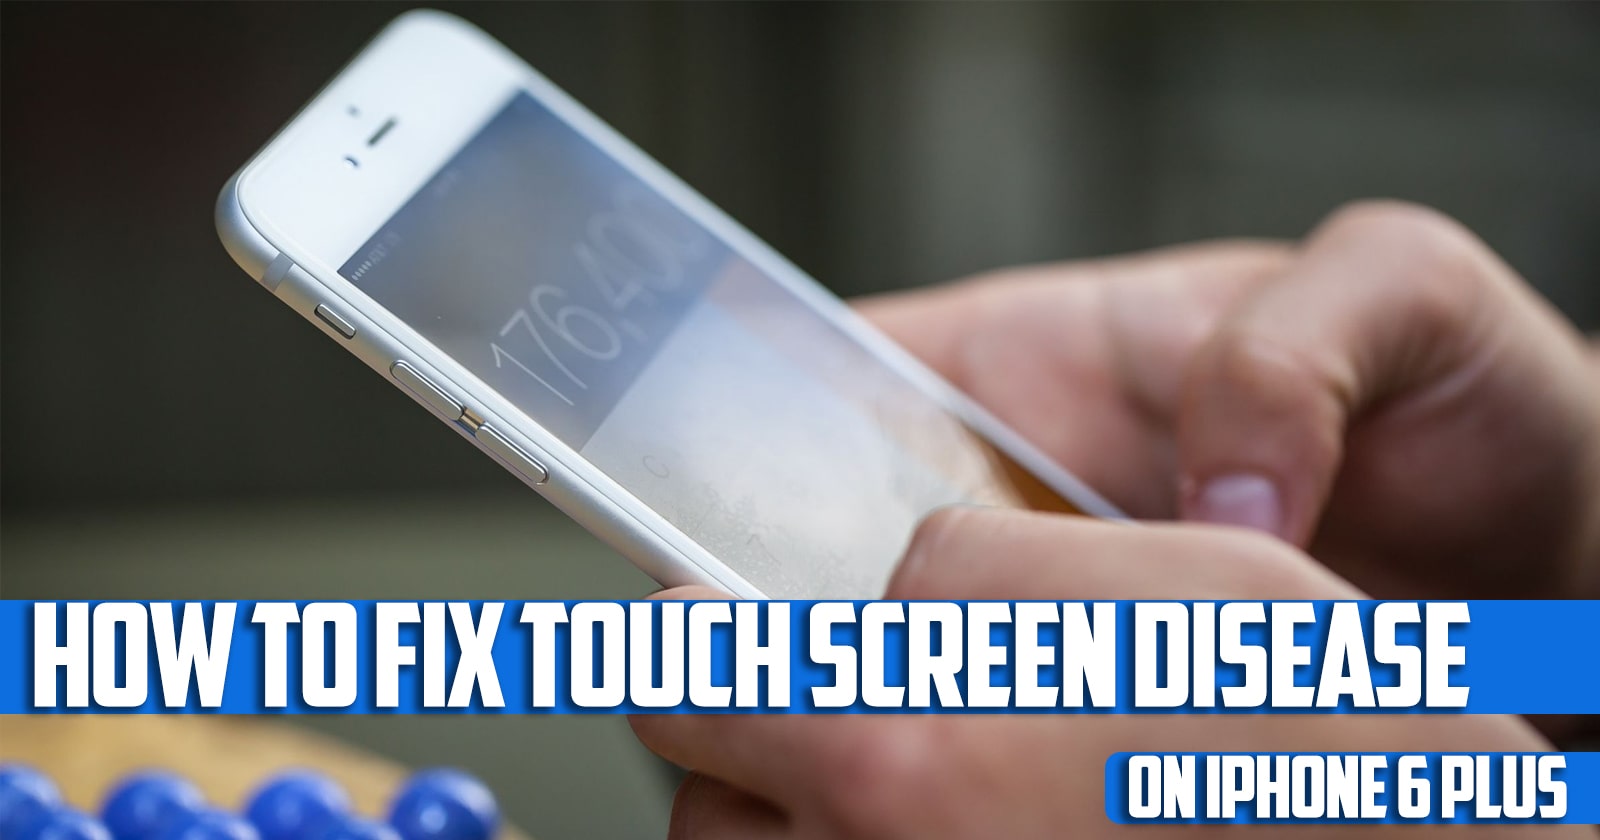 How to Fix Touch Screen Disease on iPhone 6 Plus